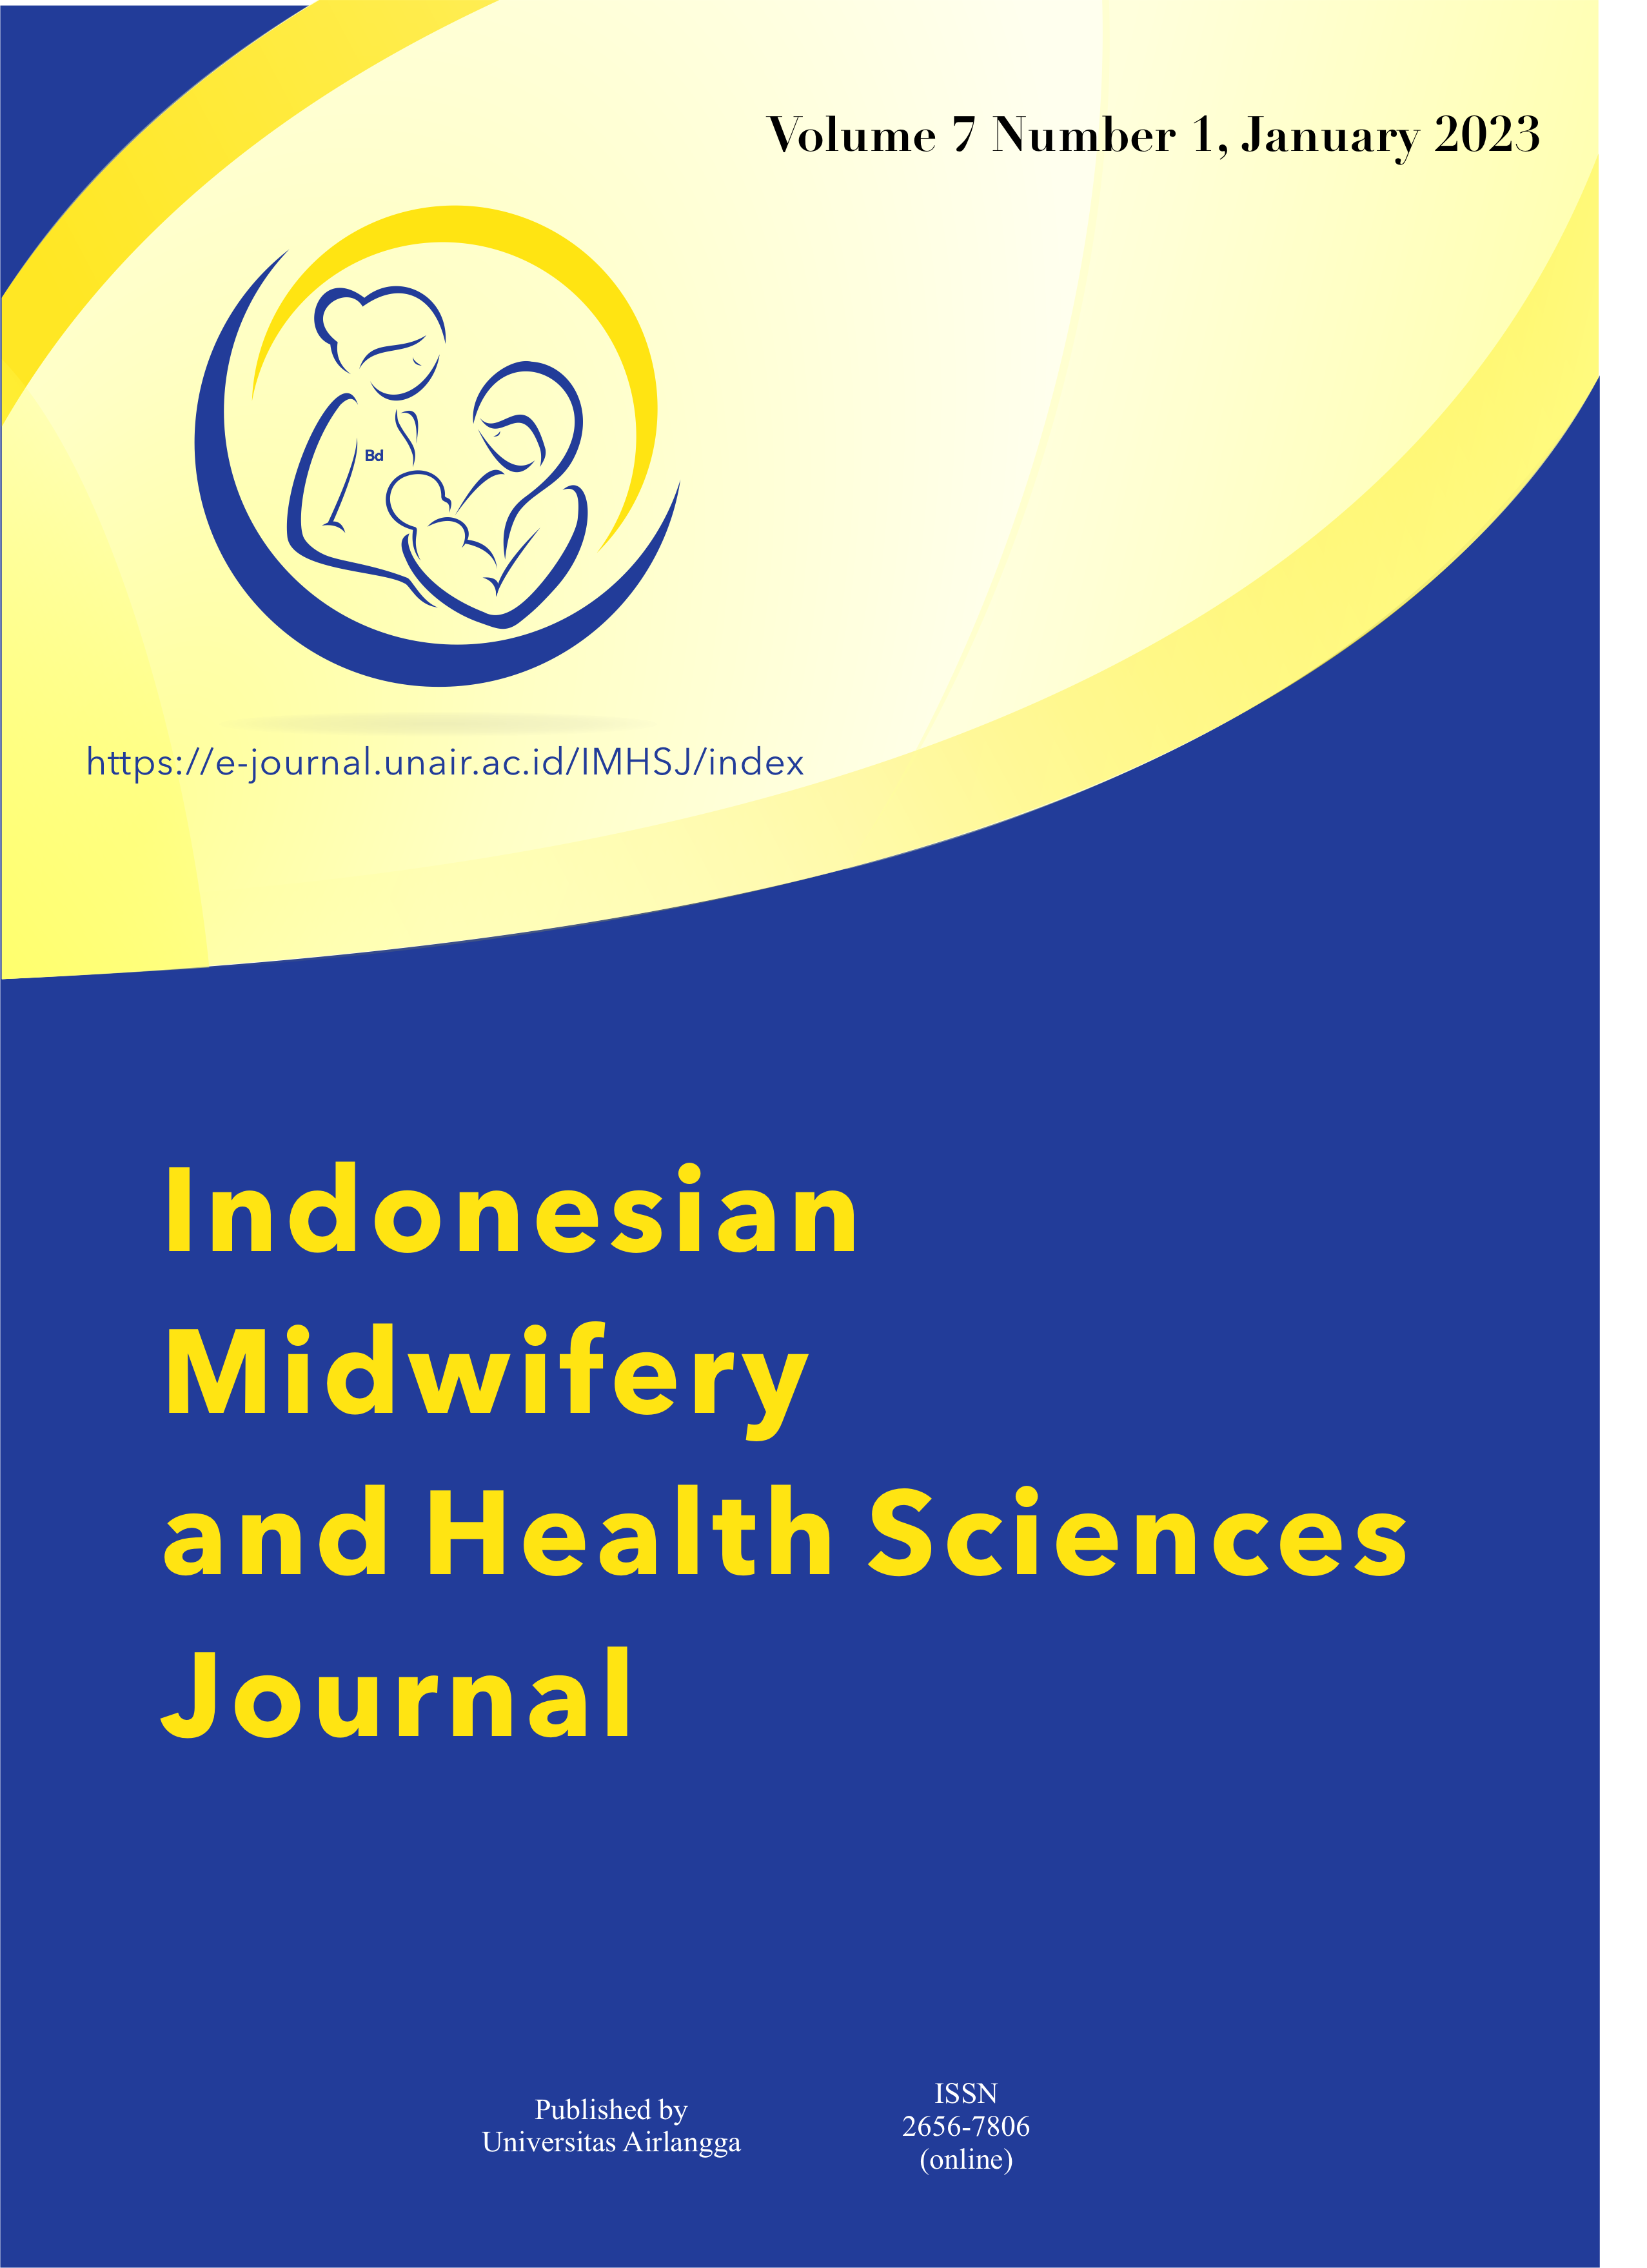 						View Vol. 7 No. 1 (2023): Indonesian Midwifery and Health Sciences Journal, January 2023
					